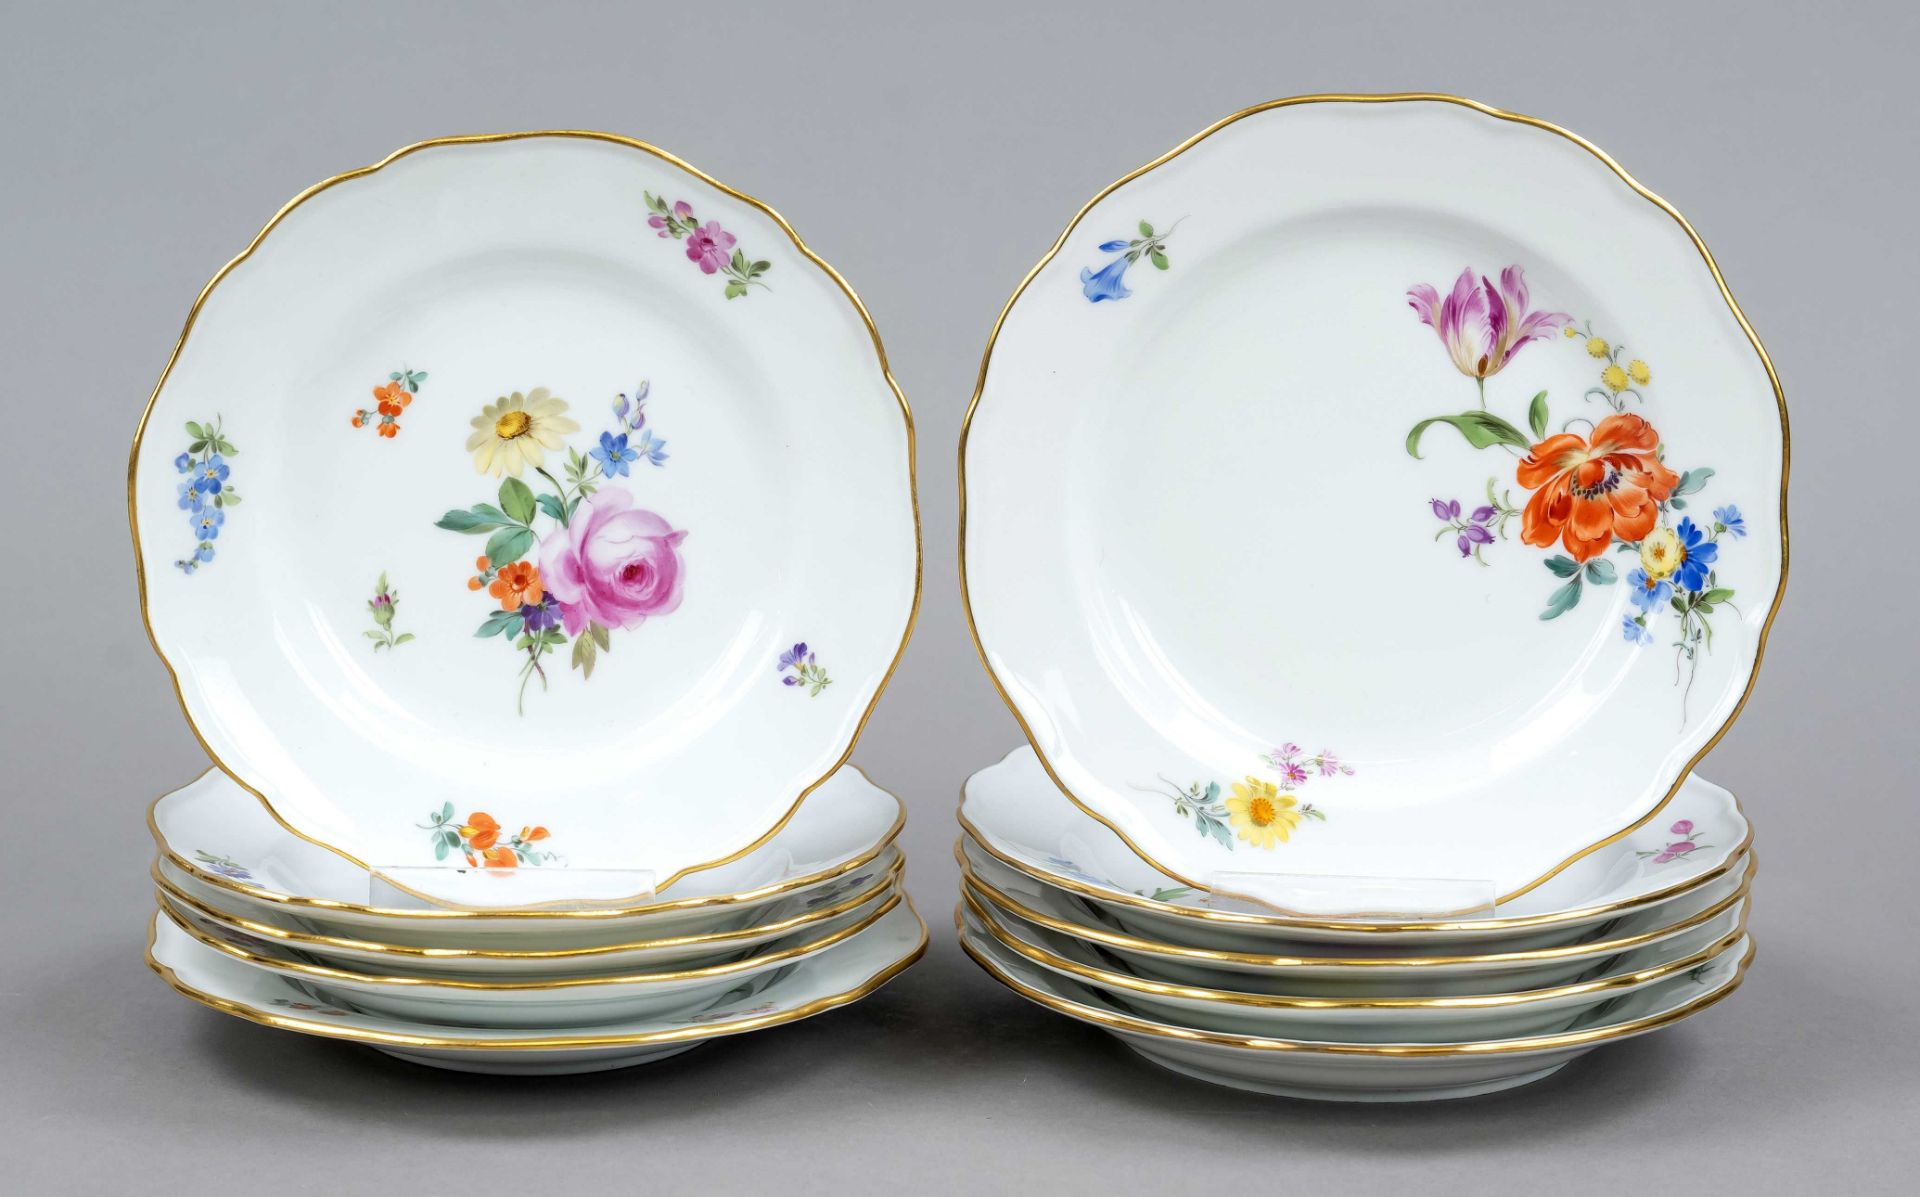 Ten bread plates, Meissen, 5x pommel swords (1850-1924) and 5x marks after 1934, 1st choice, form